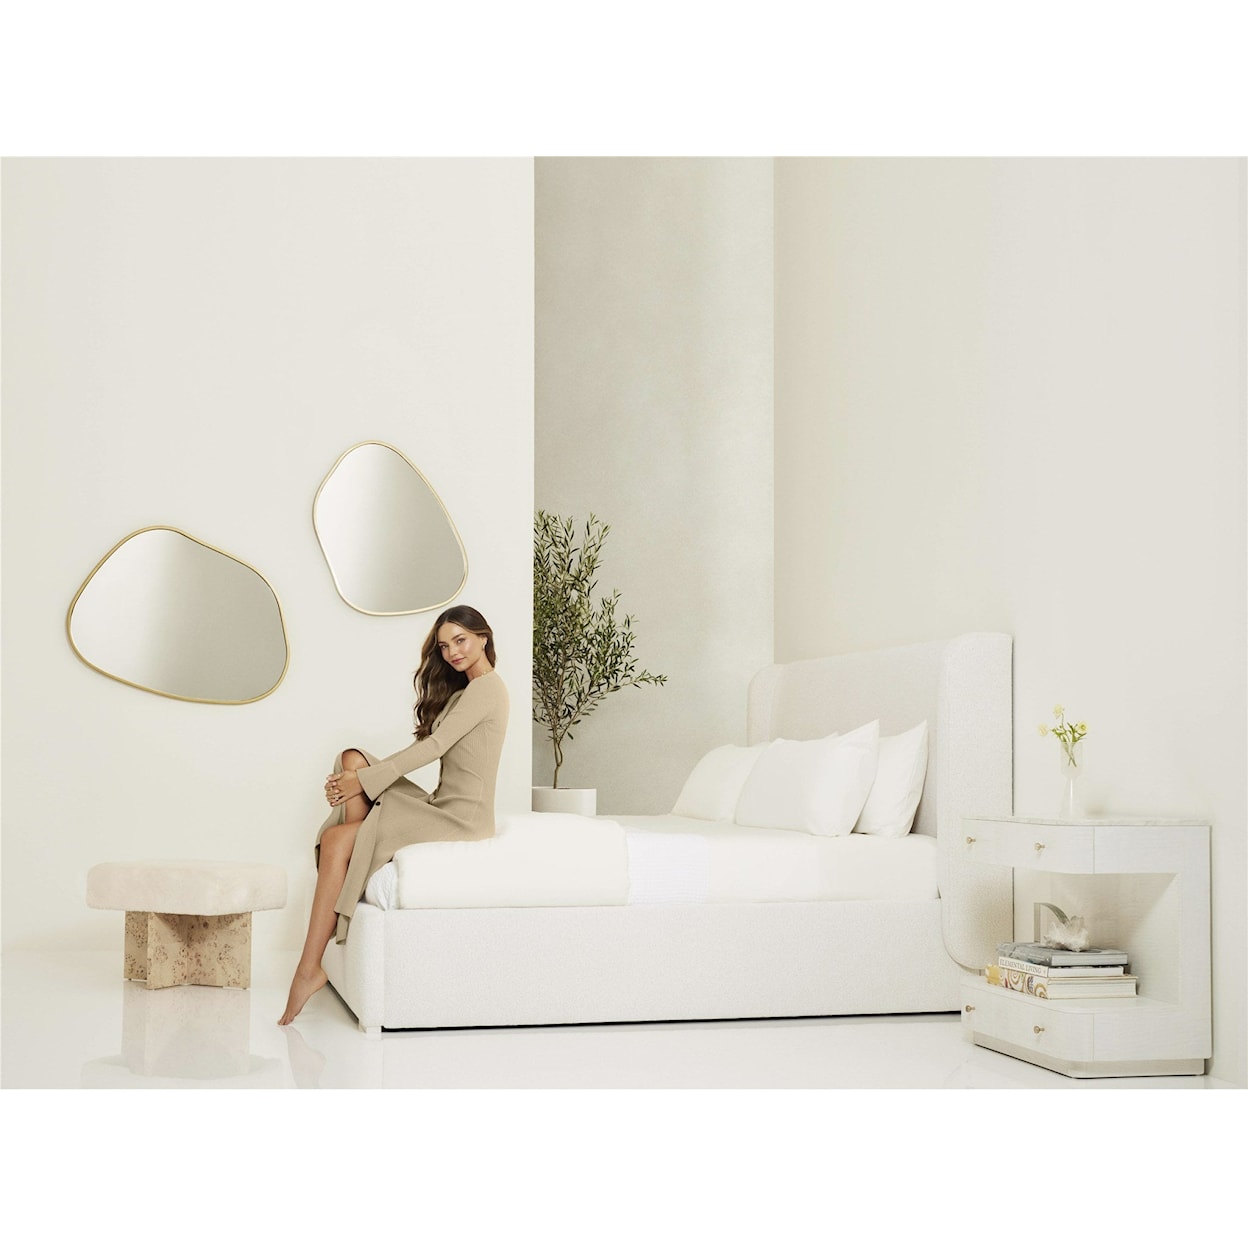 Universal Tranquility - Miranda Kerr Home Upholstered Bed Queen